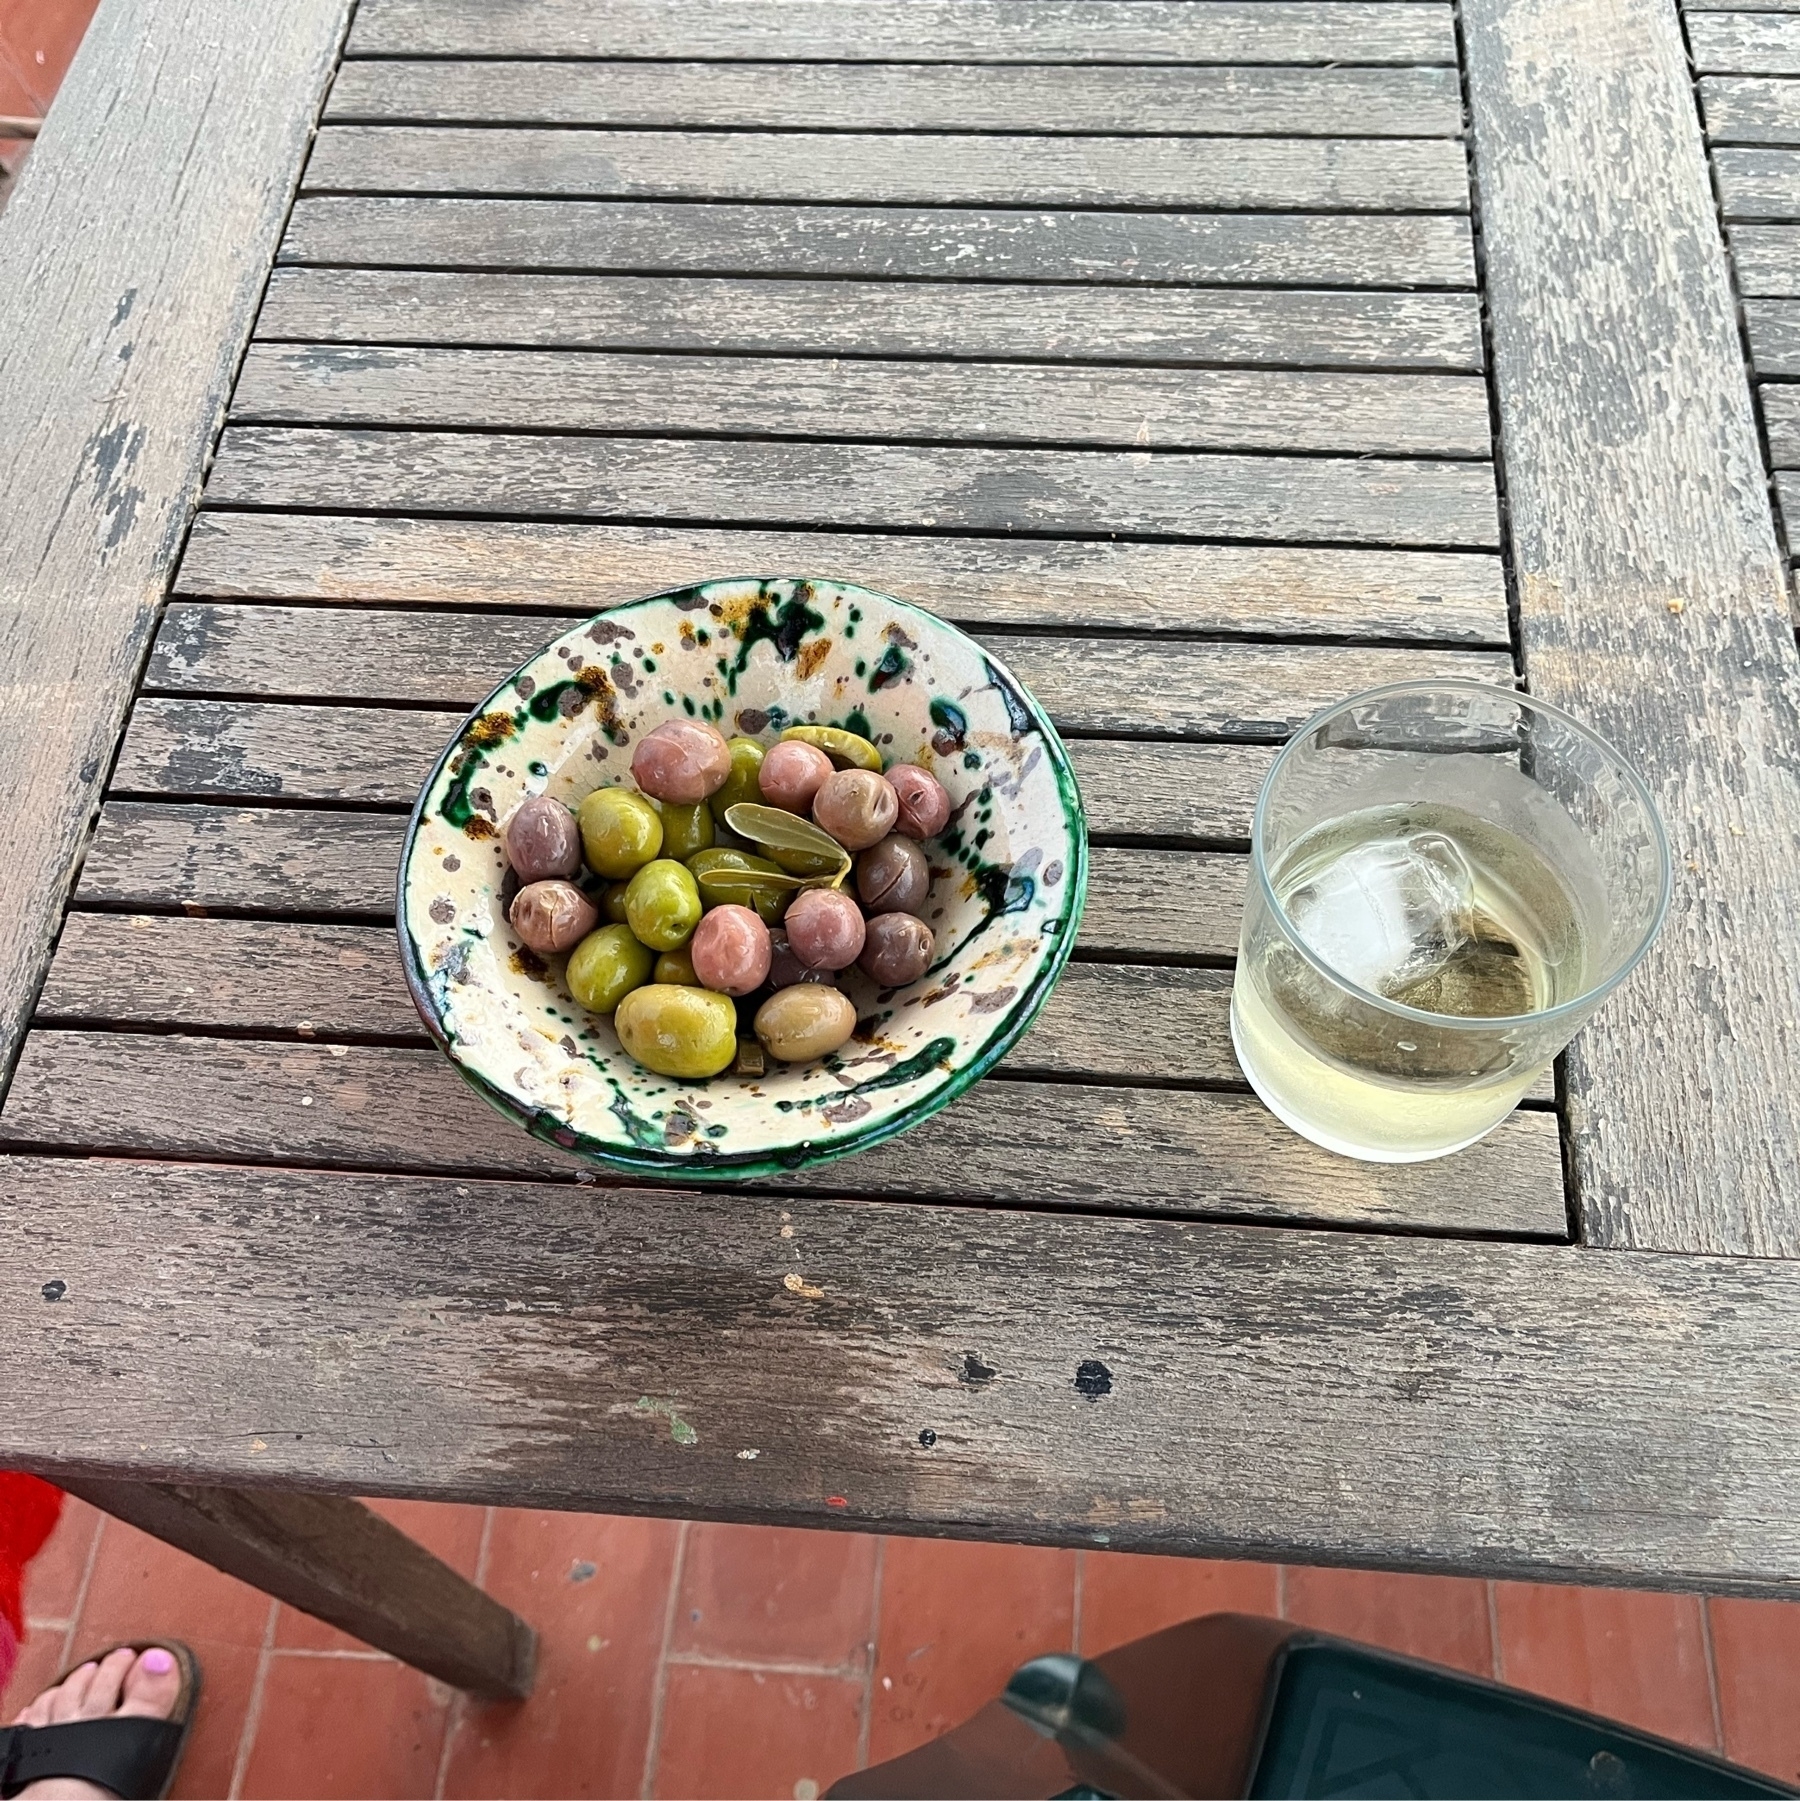 Green and black olives on a bowl next to a glass of fino.